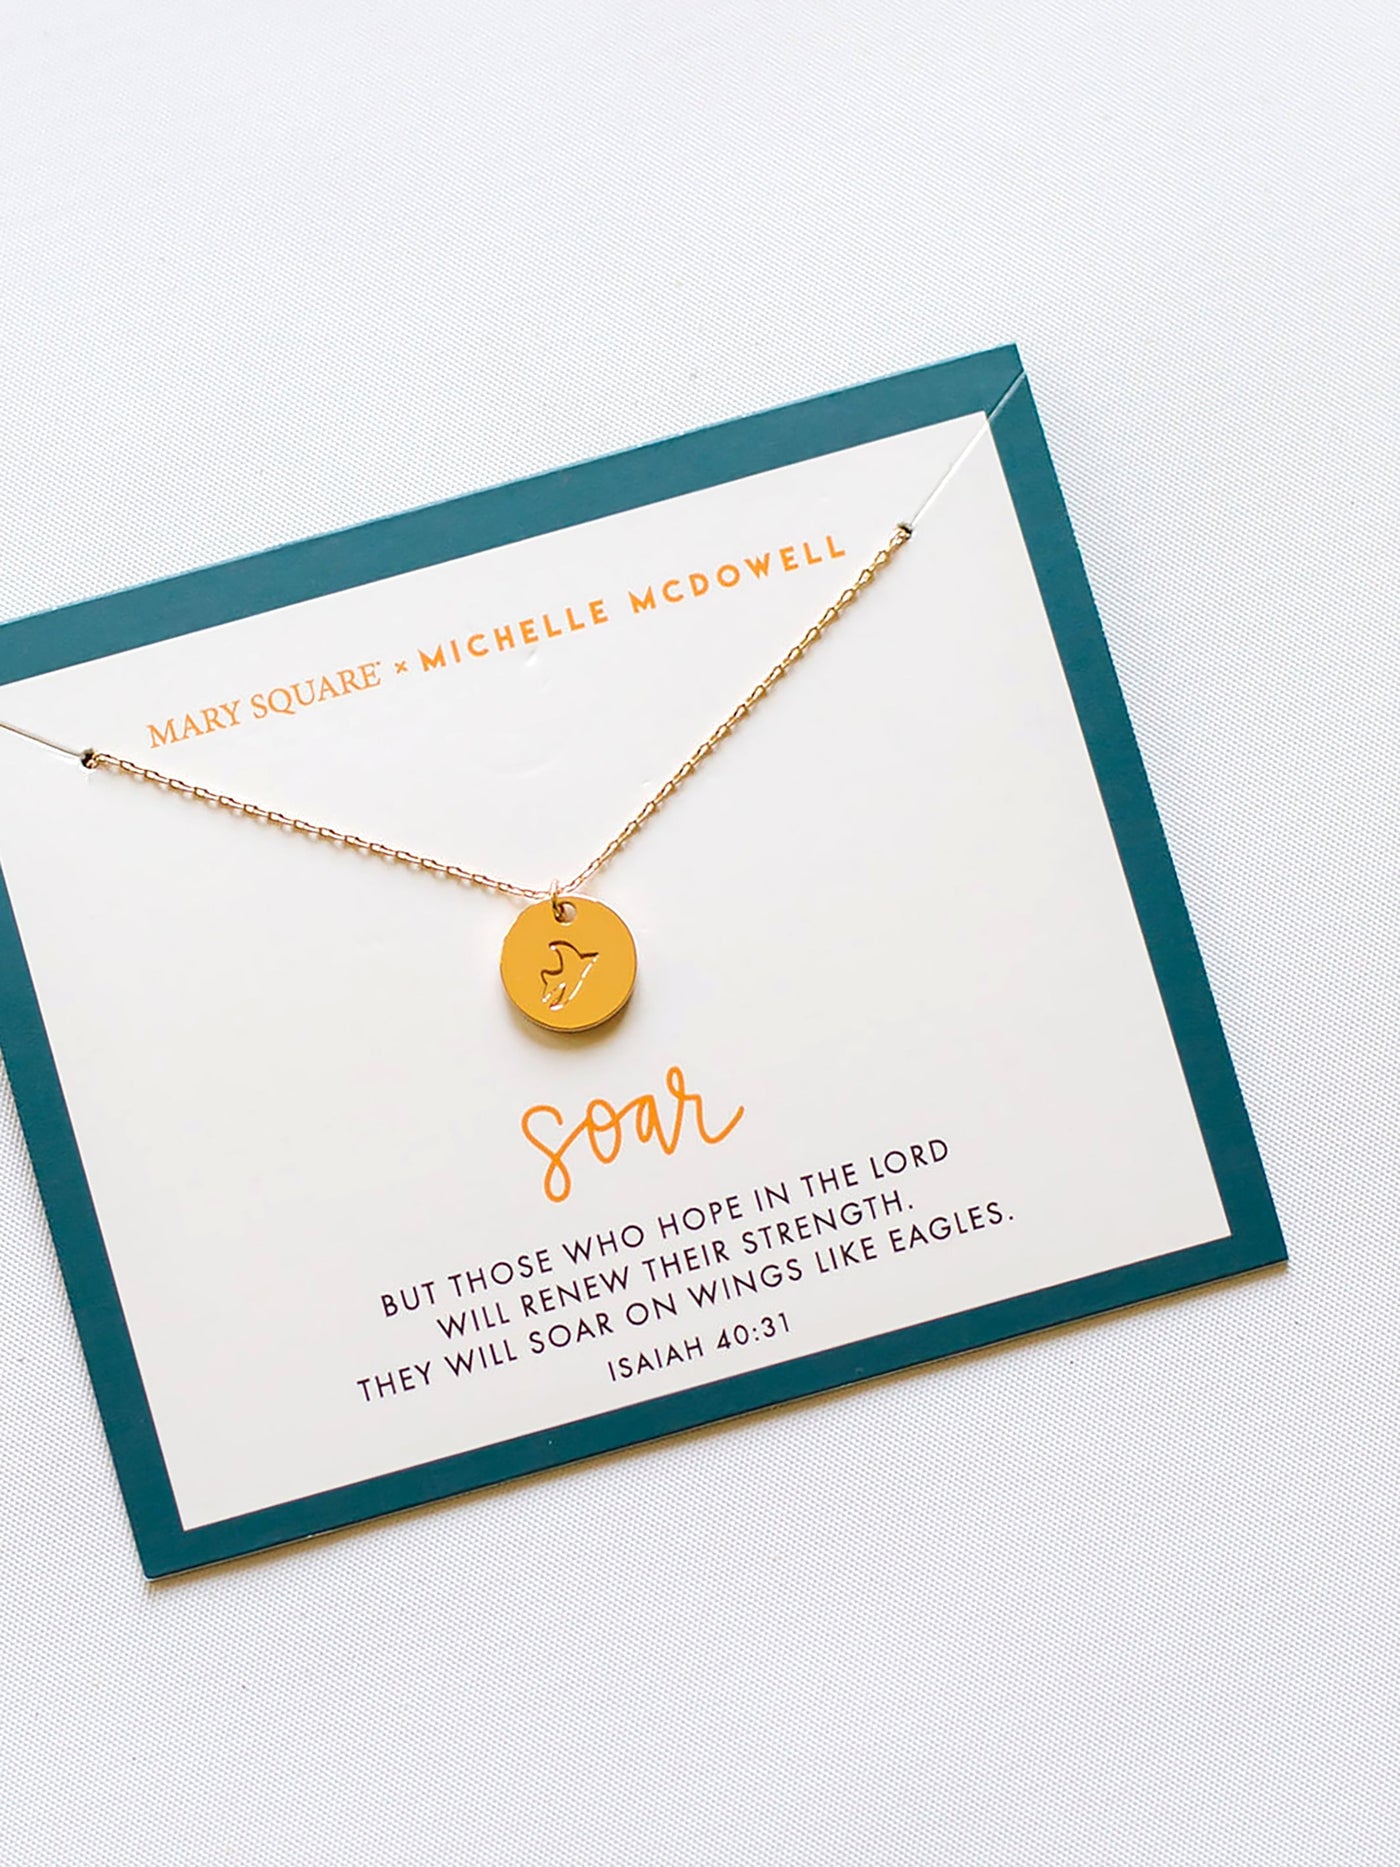 Soar Inspirational Necklace - Mary Square, LLC